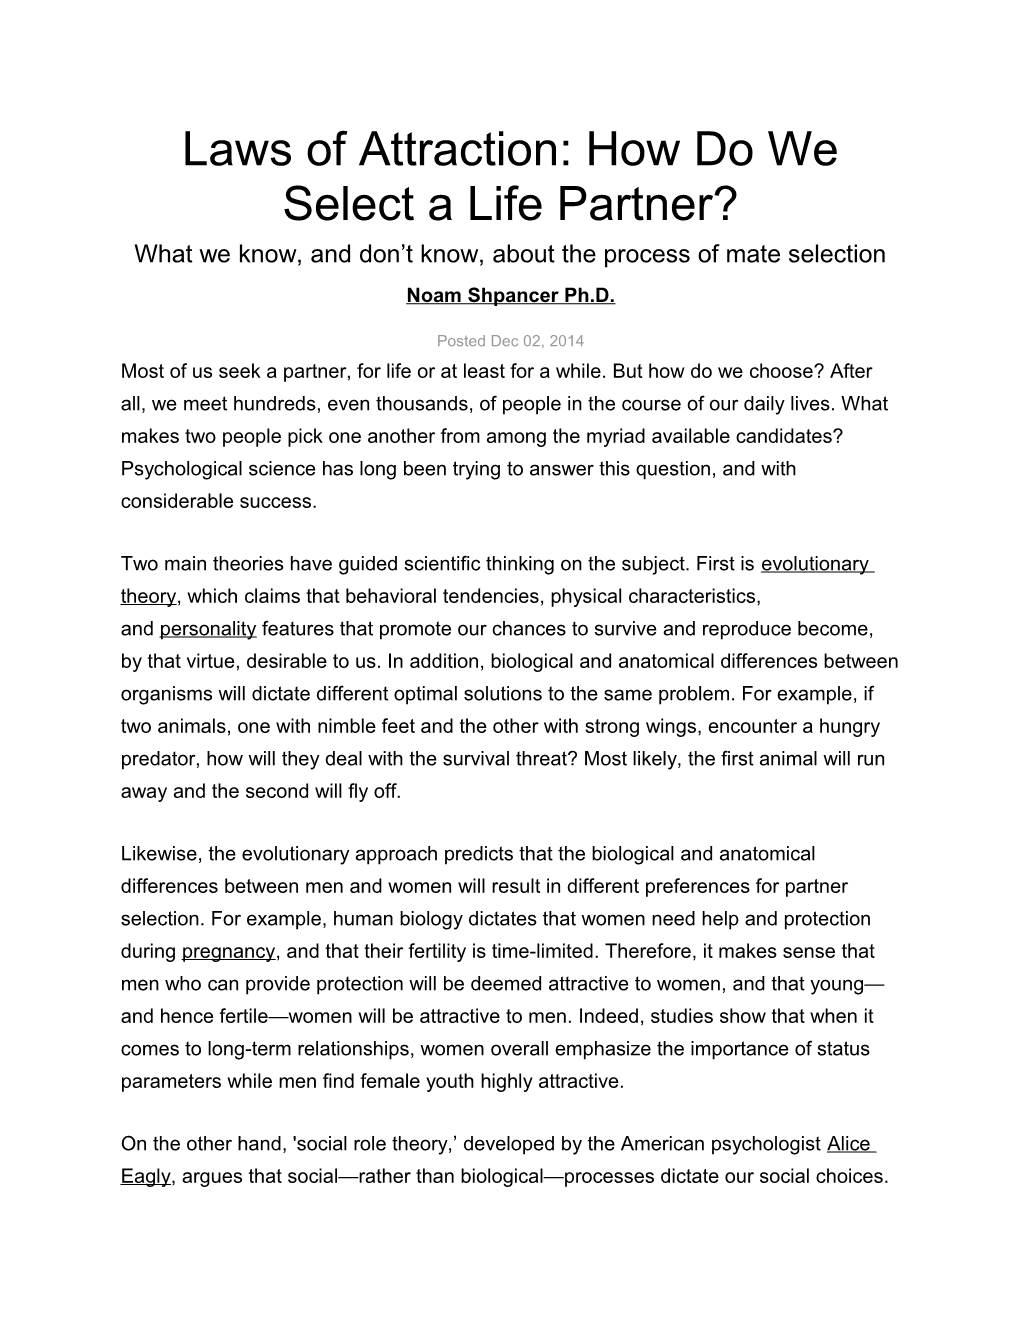 Laws of Attraction: How Do We Select a Life Partner?